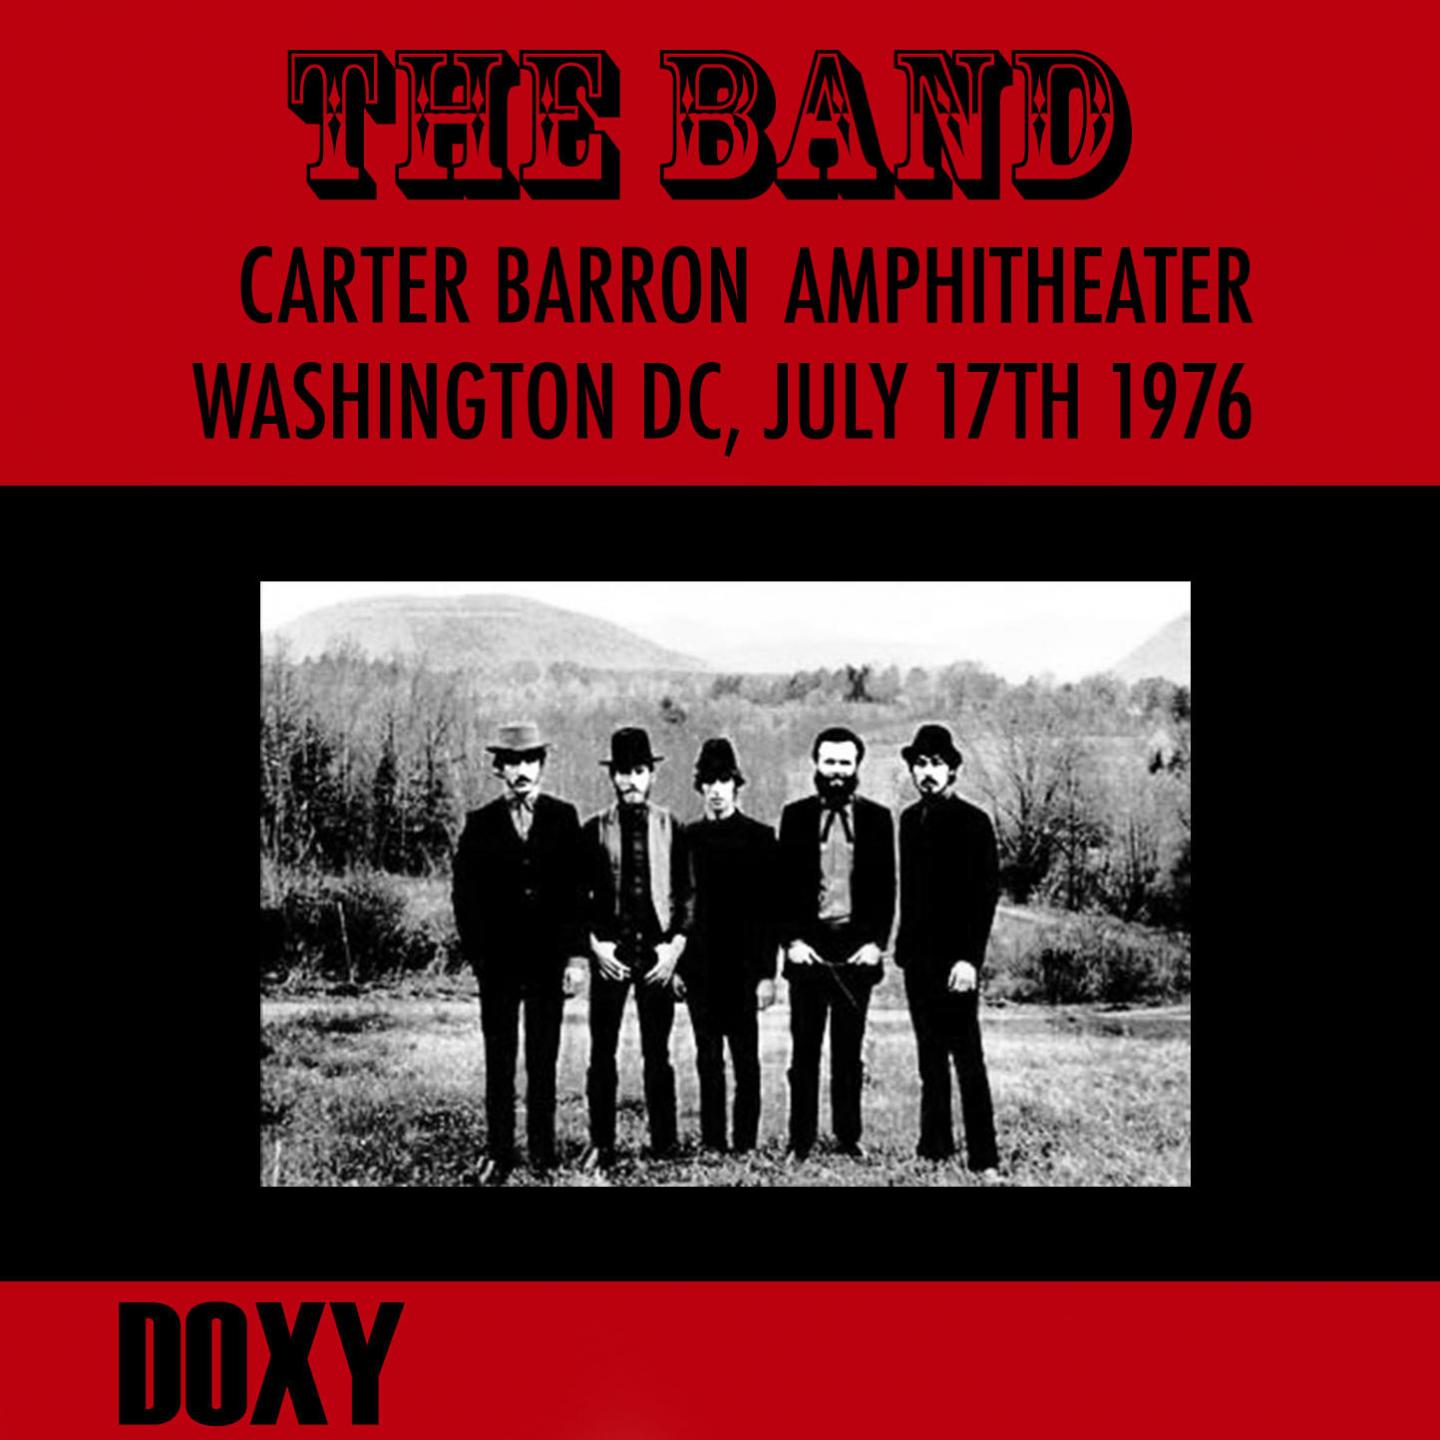 Carter Barron Amphitheater Washington DC, July 17th 1976 (Doxy Collection, Remastered, Live)